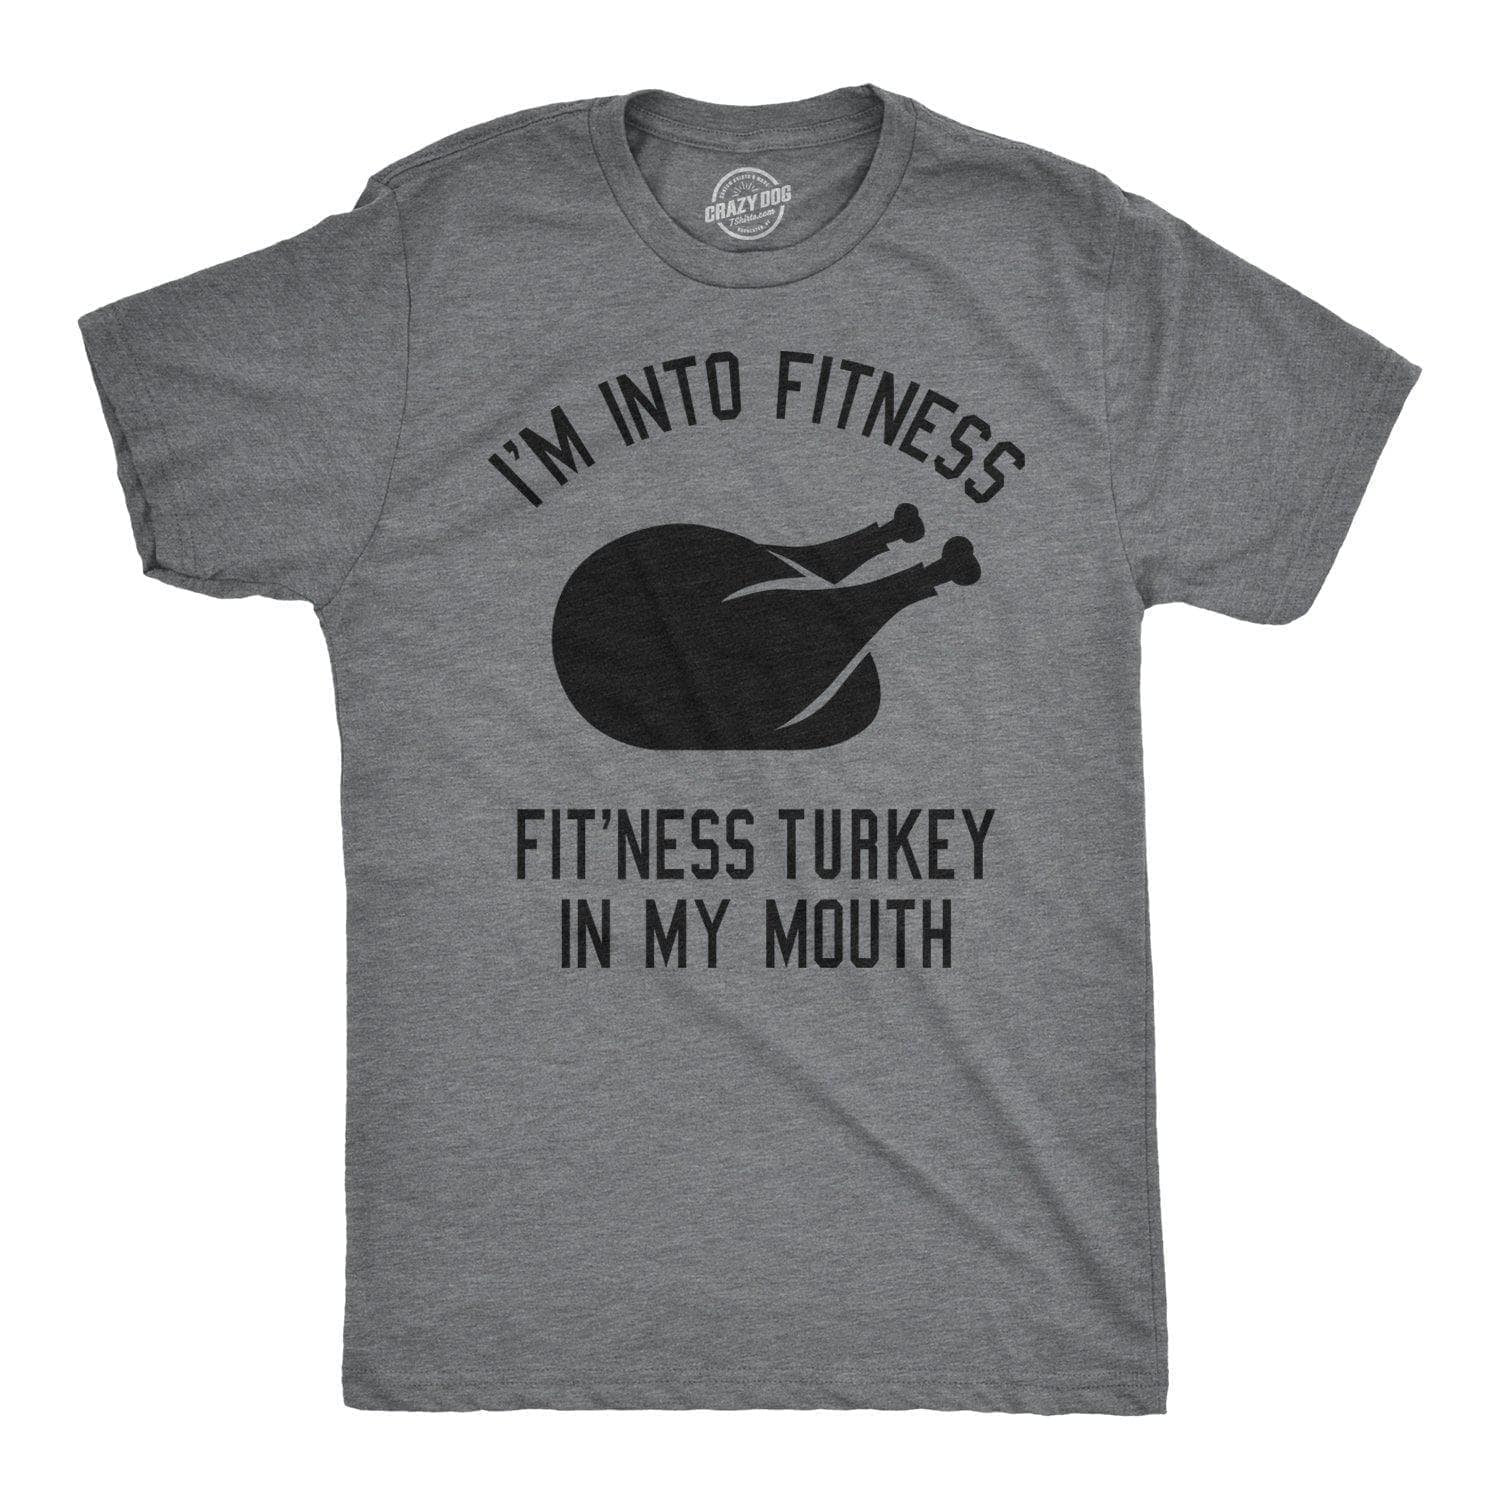 Fitness Turkey In My Mouth Men's Tshirt - Crazy Dog T-Shirts